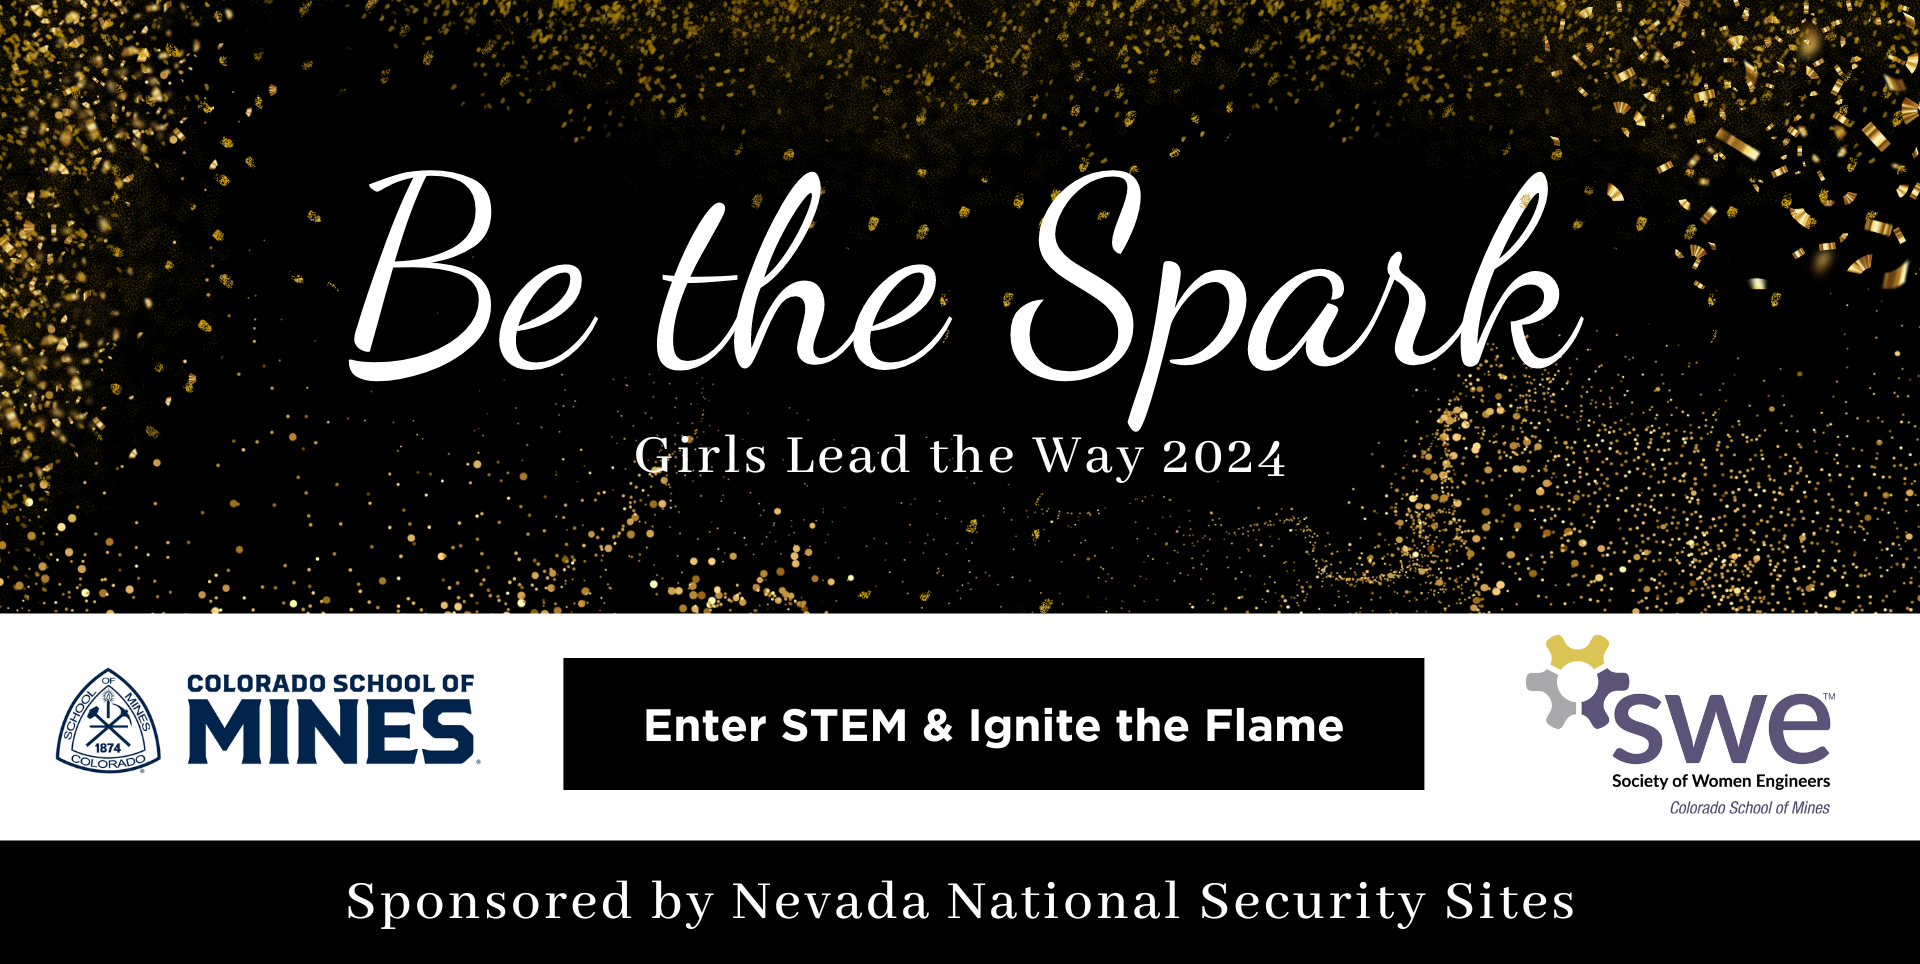 A header banner that reads "Be the Spark. Girls Lead the Way 2024." Second line shows the Colorado School of Mines and Society of Women Engineers logos with the phrases "Enter STEM & Ignite the Flame" and "Sponsored by Nevada National Security Site"